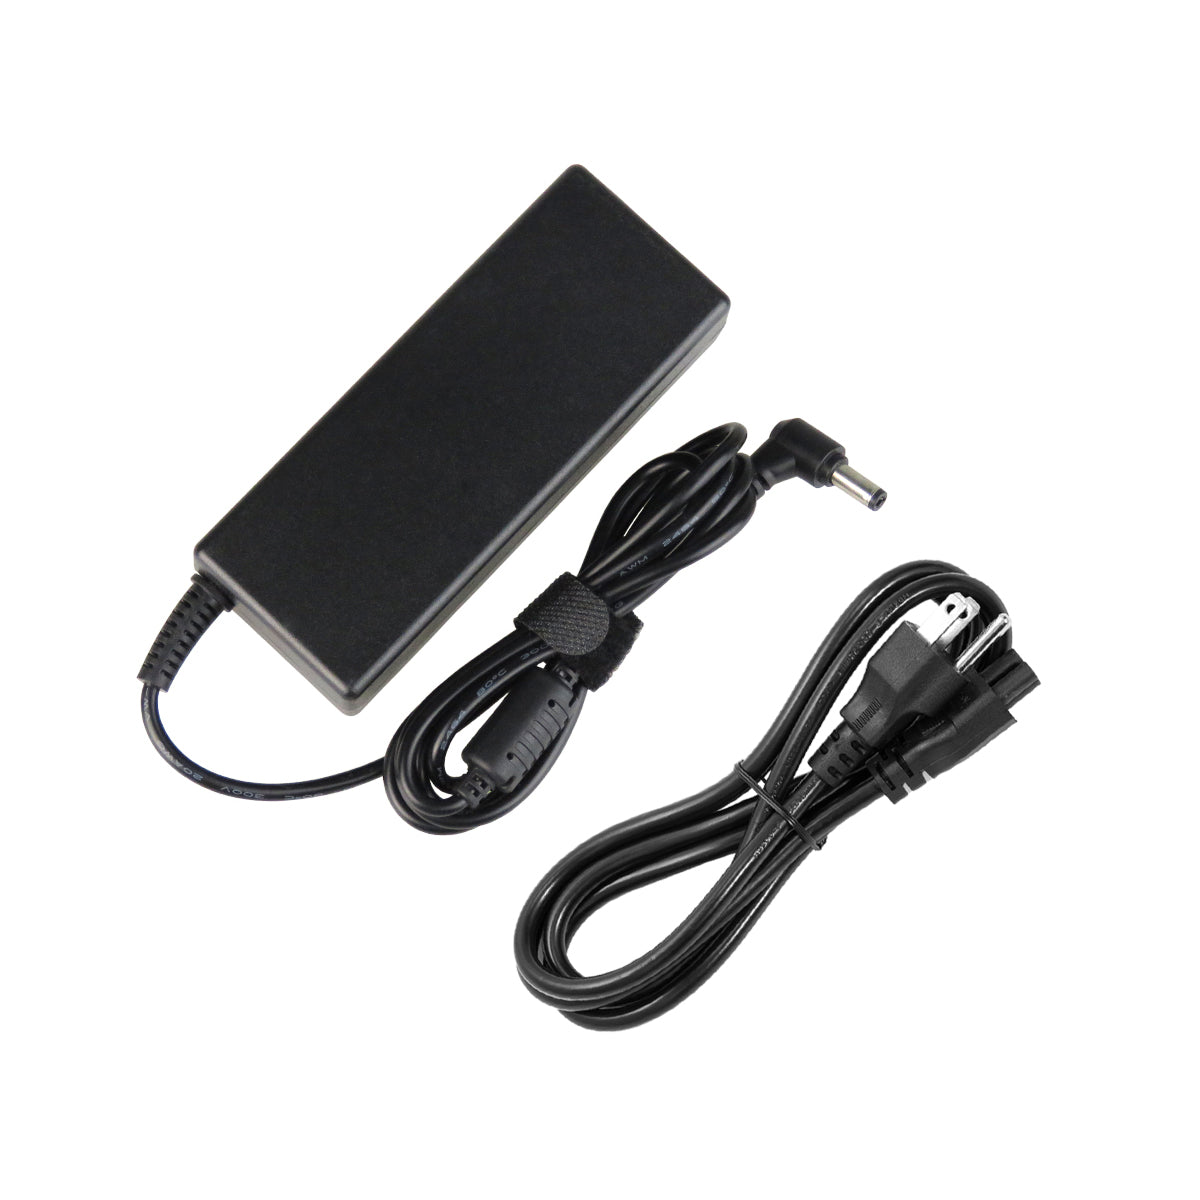 AC Adapter Charger for ASUS A83BR Laptop.